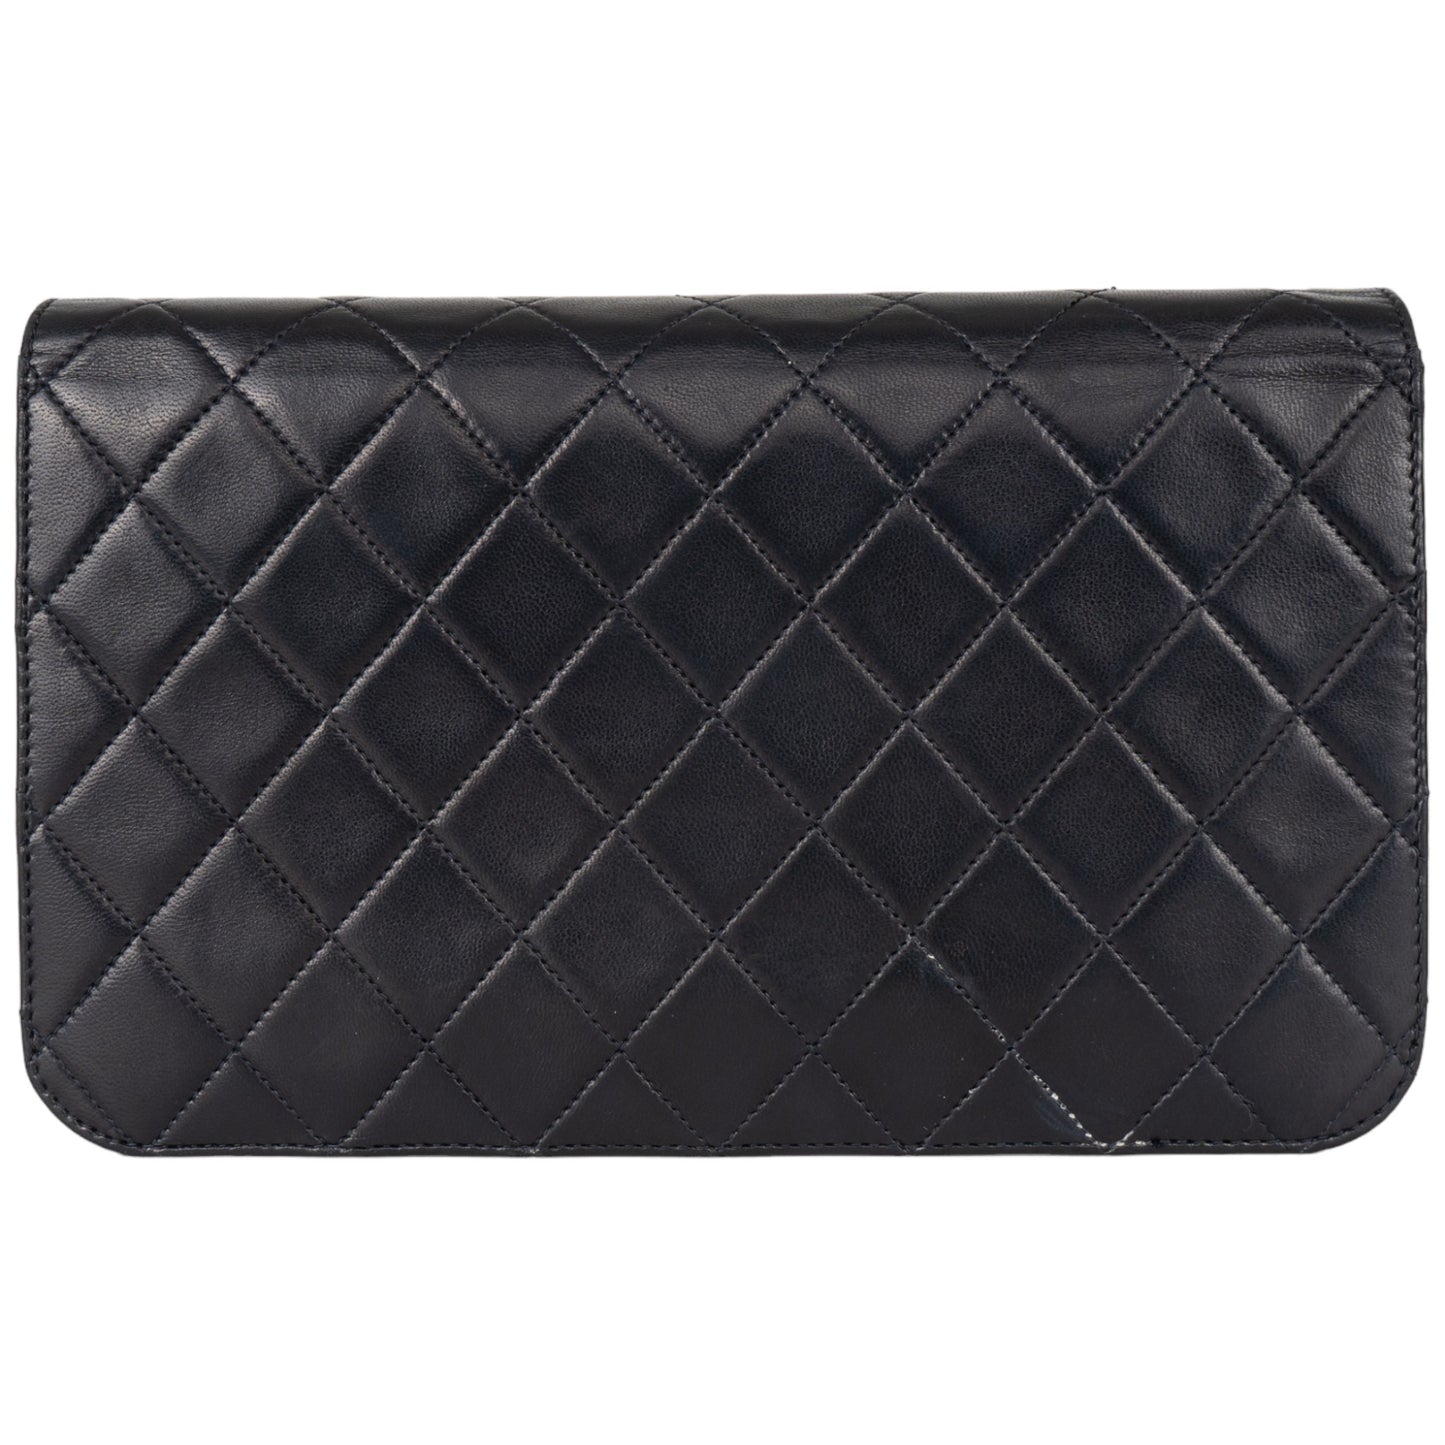 CHANEL QUILTED LAMBSKIN 24K GOLD SINGLE FLAP BAG